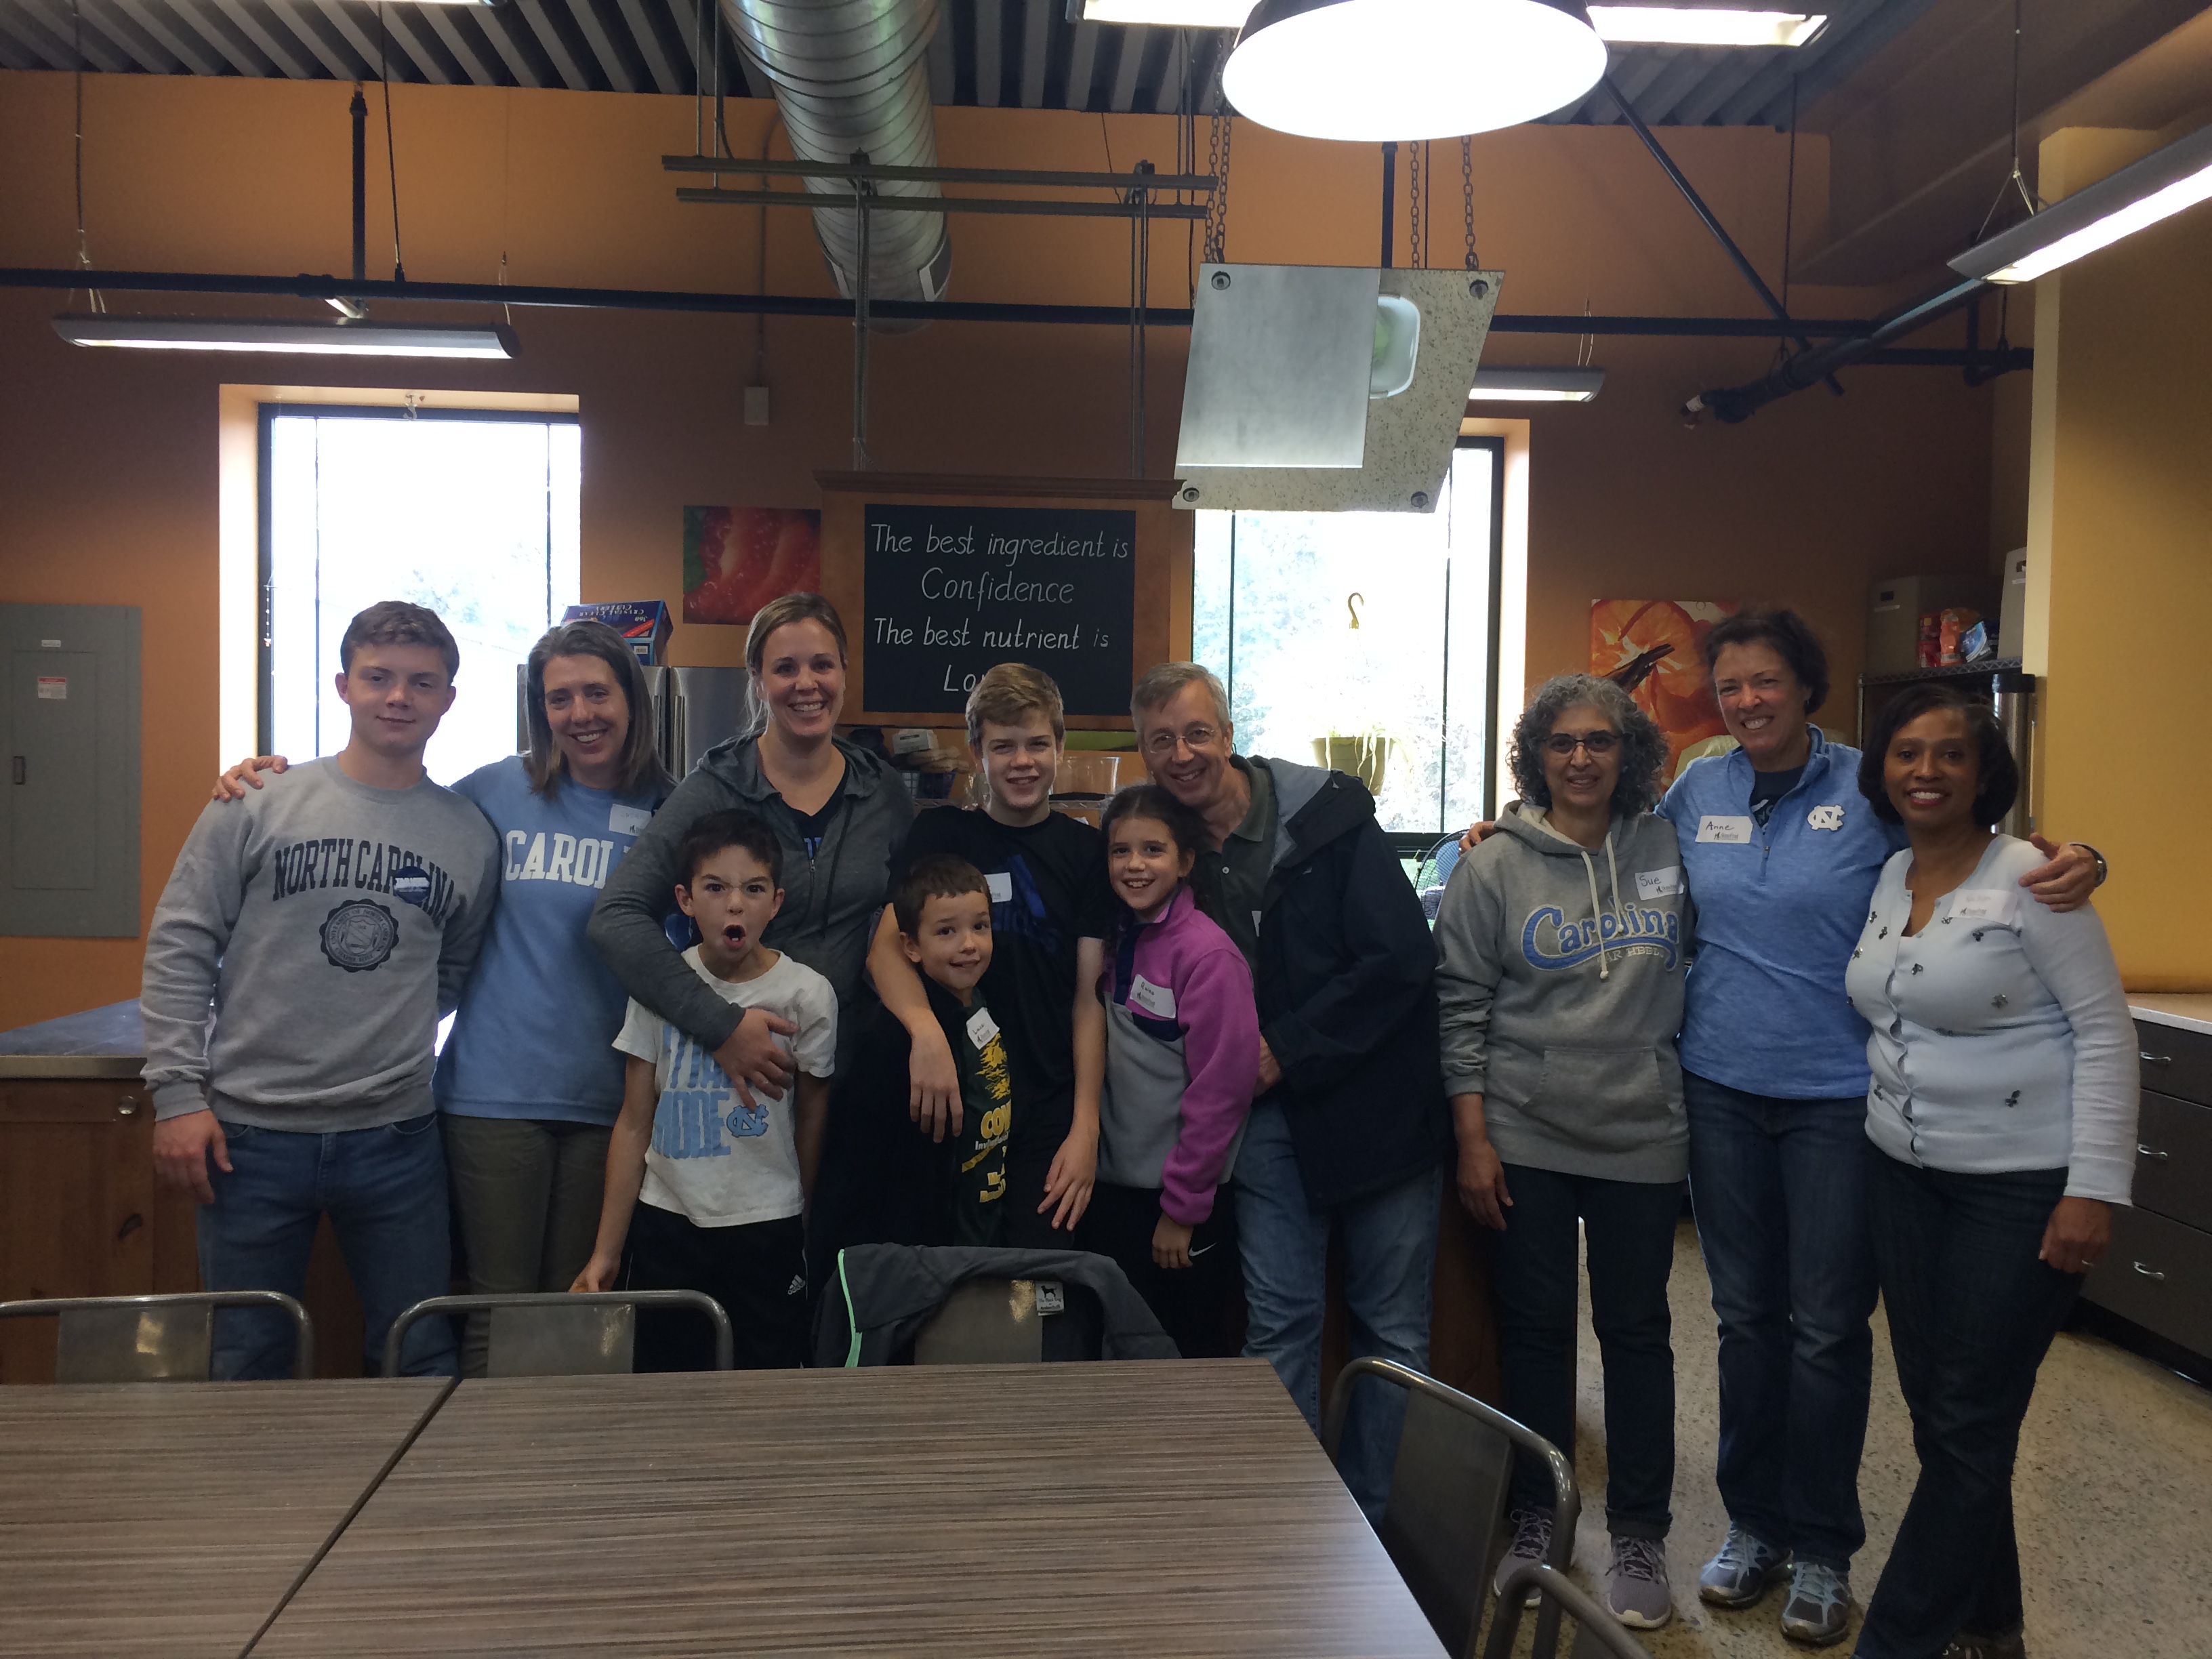 Central Jersey Tar Heels team up to serve on Tar Heel Service Day!